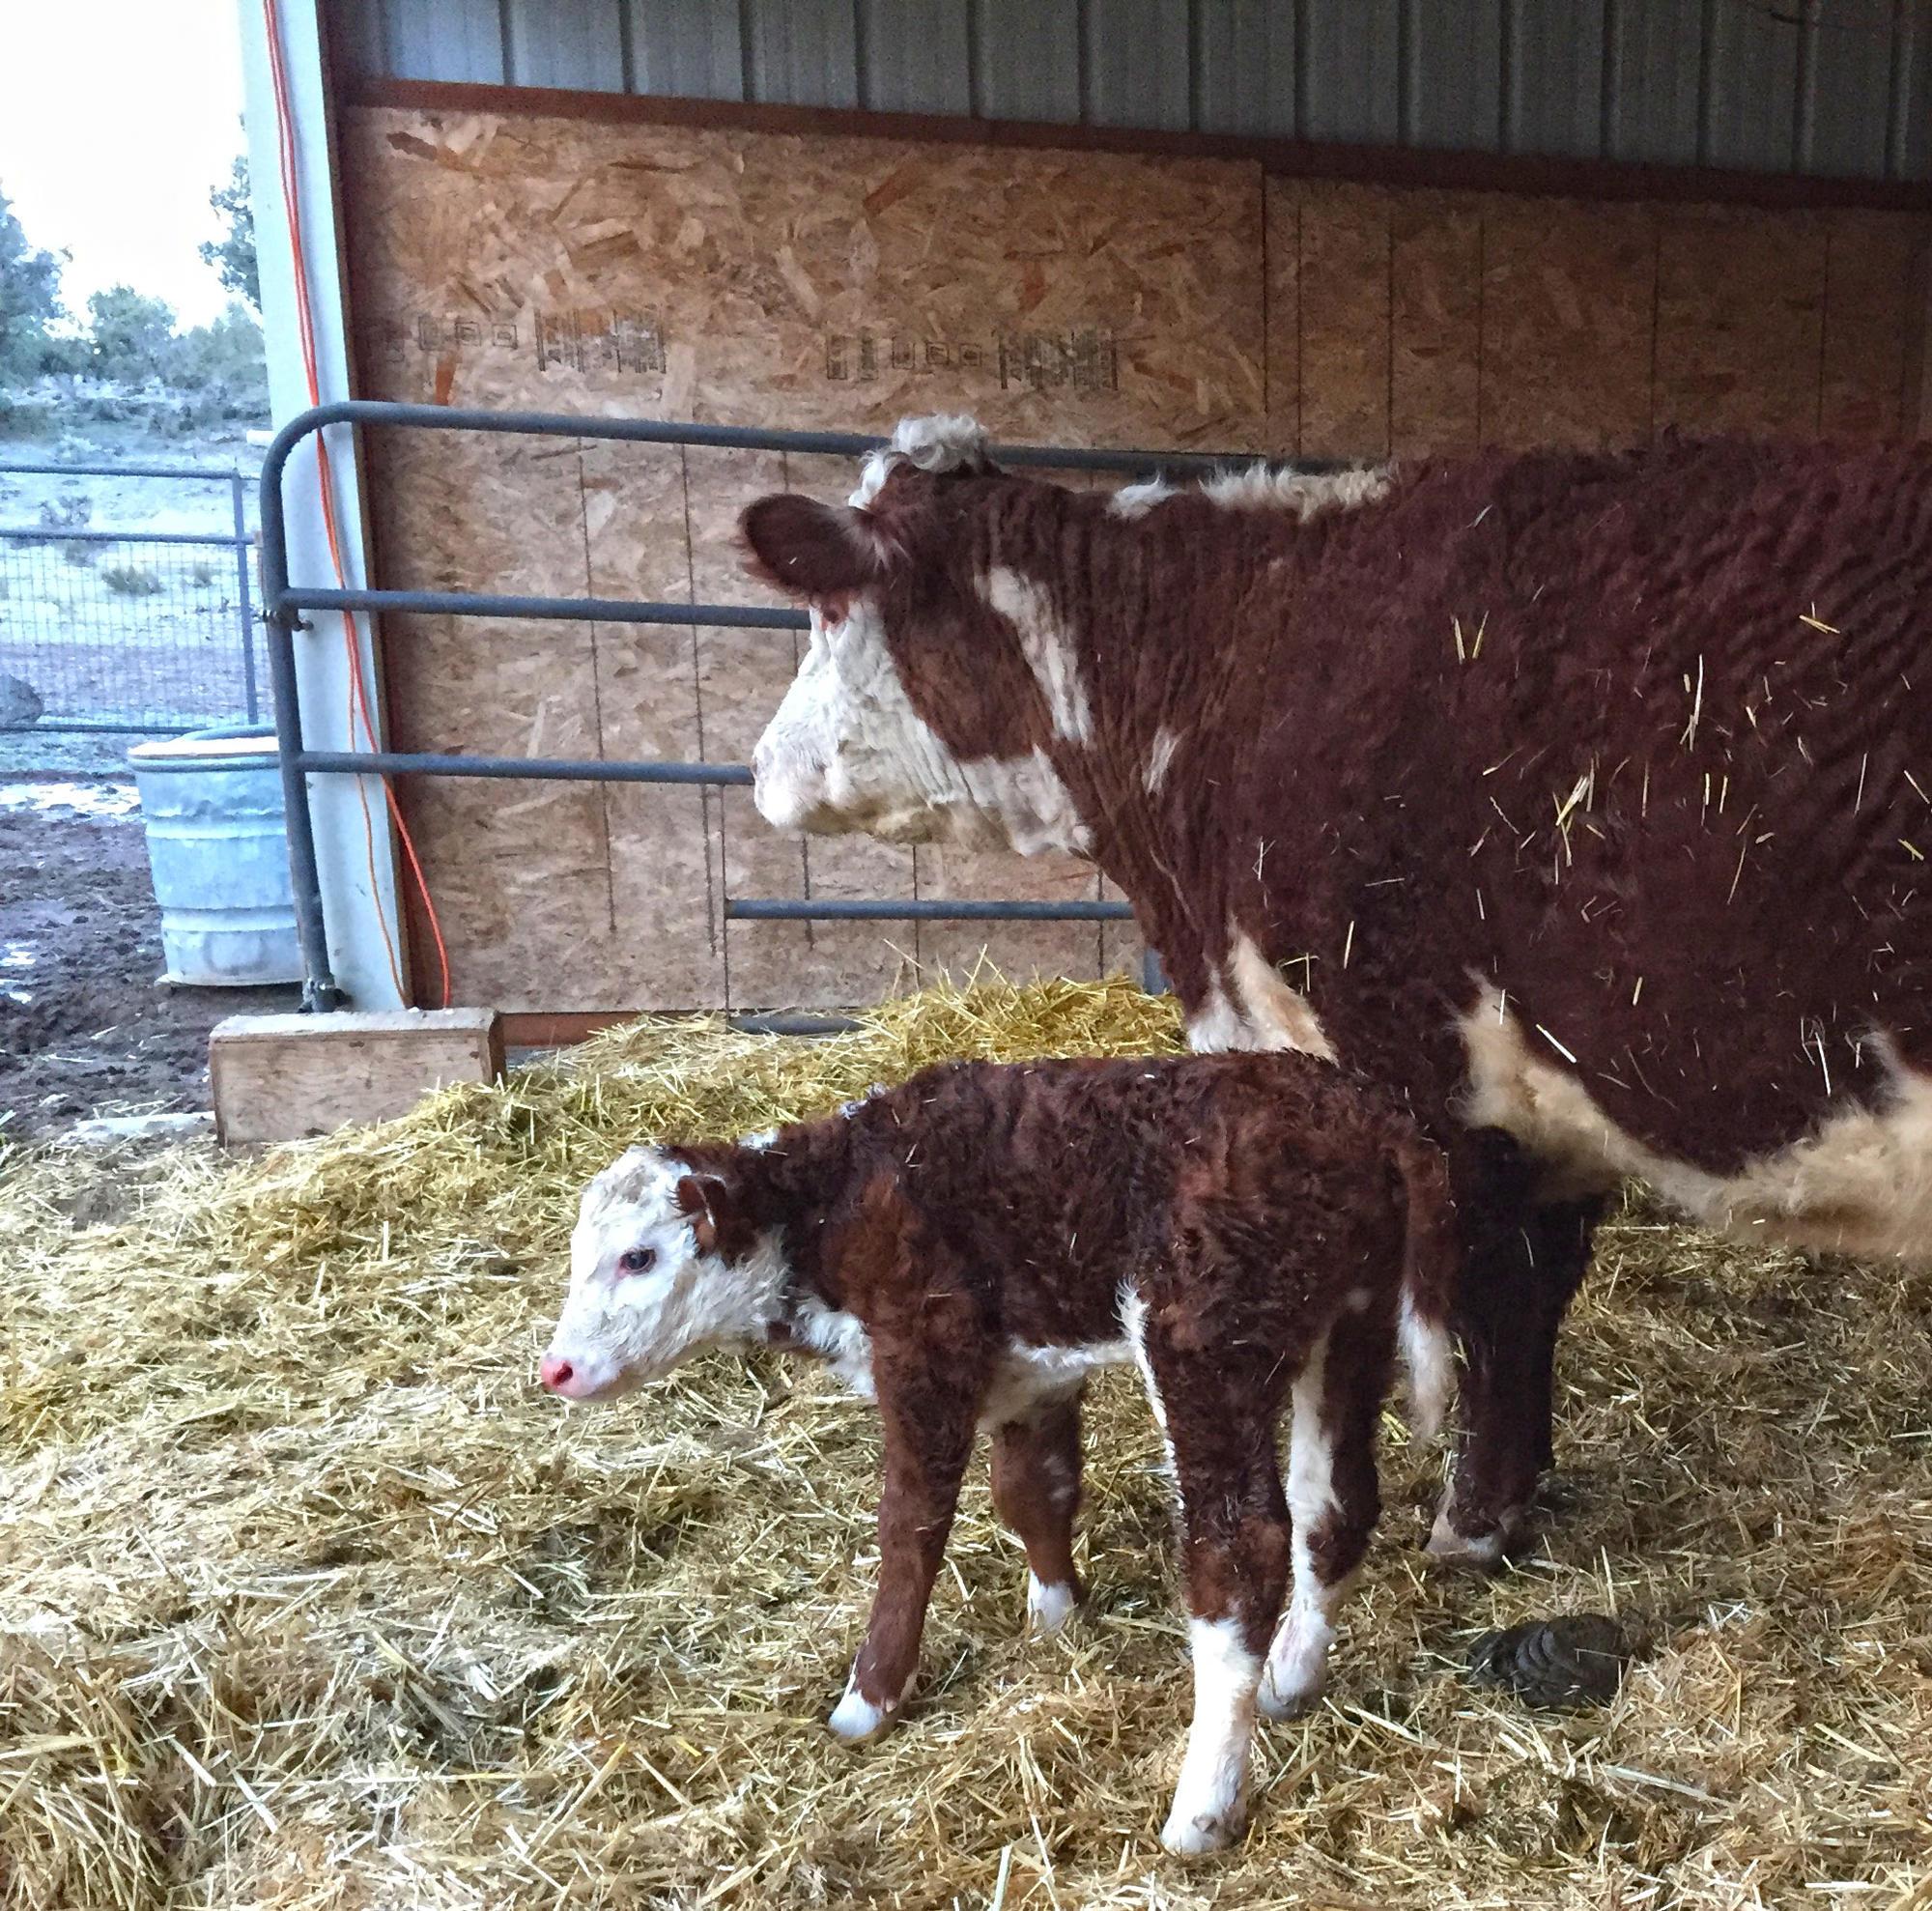 newborn calf and mother cow in barn